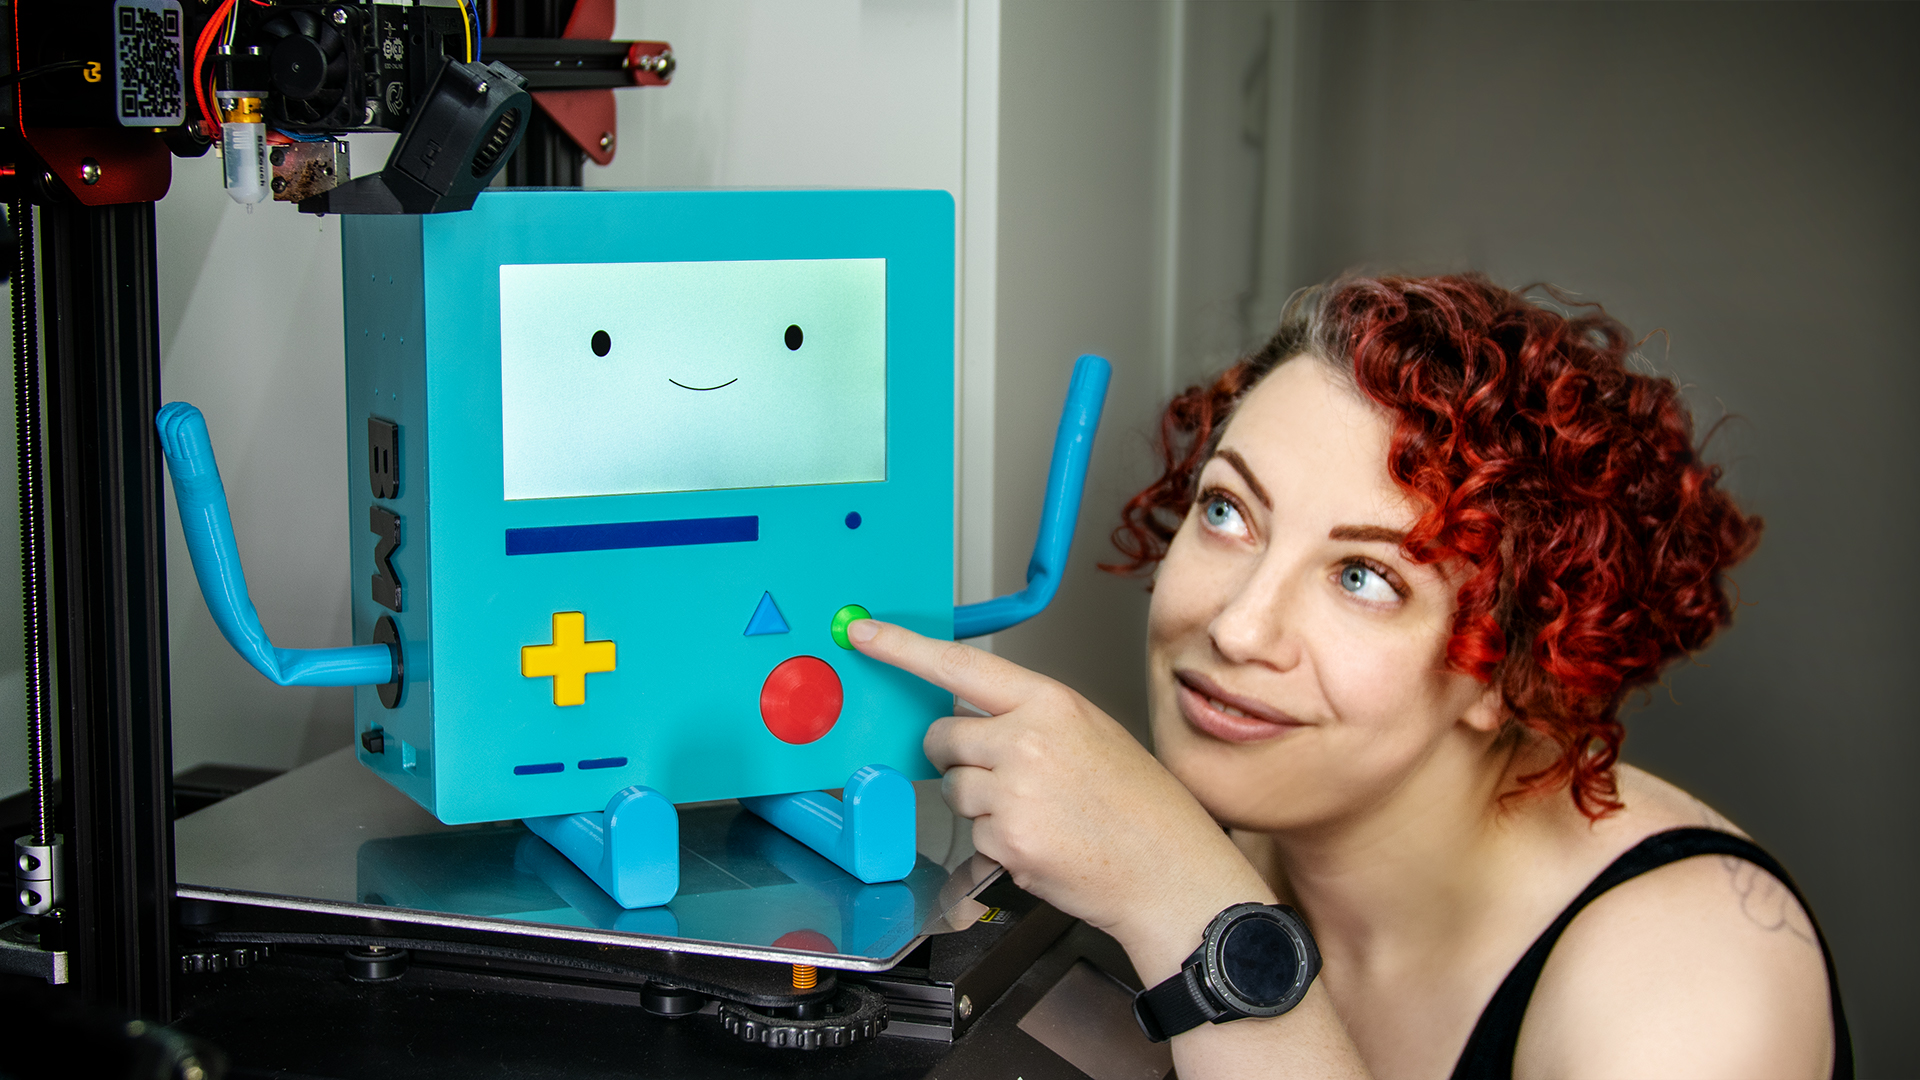 Life Sized Talking BMO From Adventure Time (that's Also an Octoprint Server!)